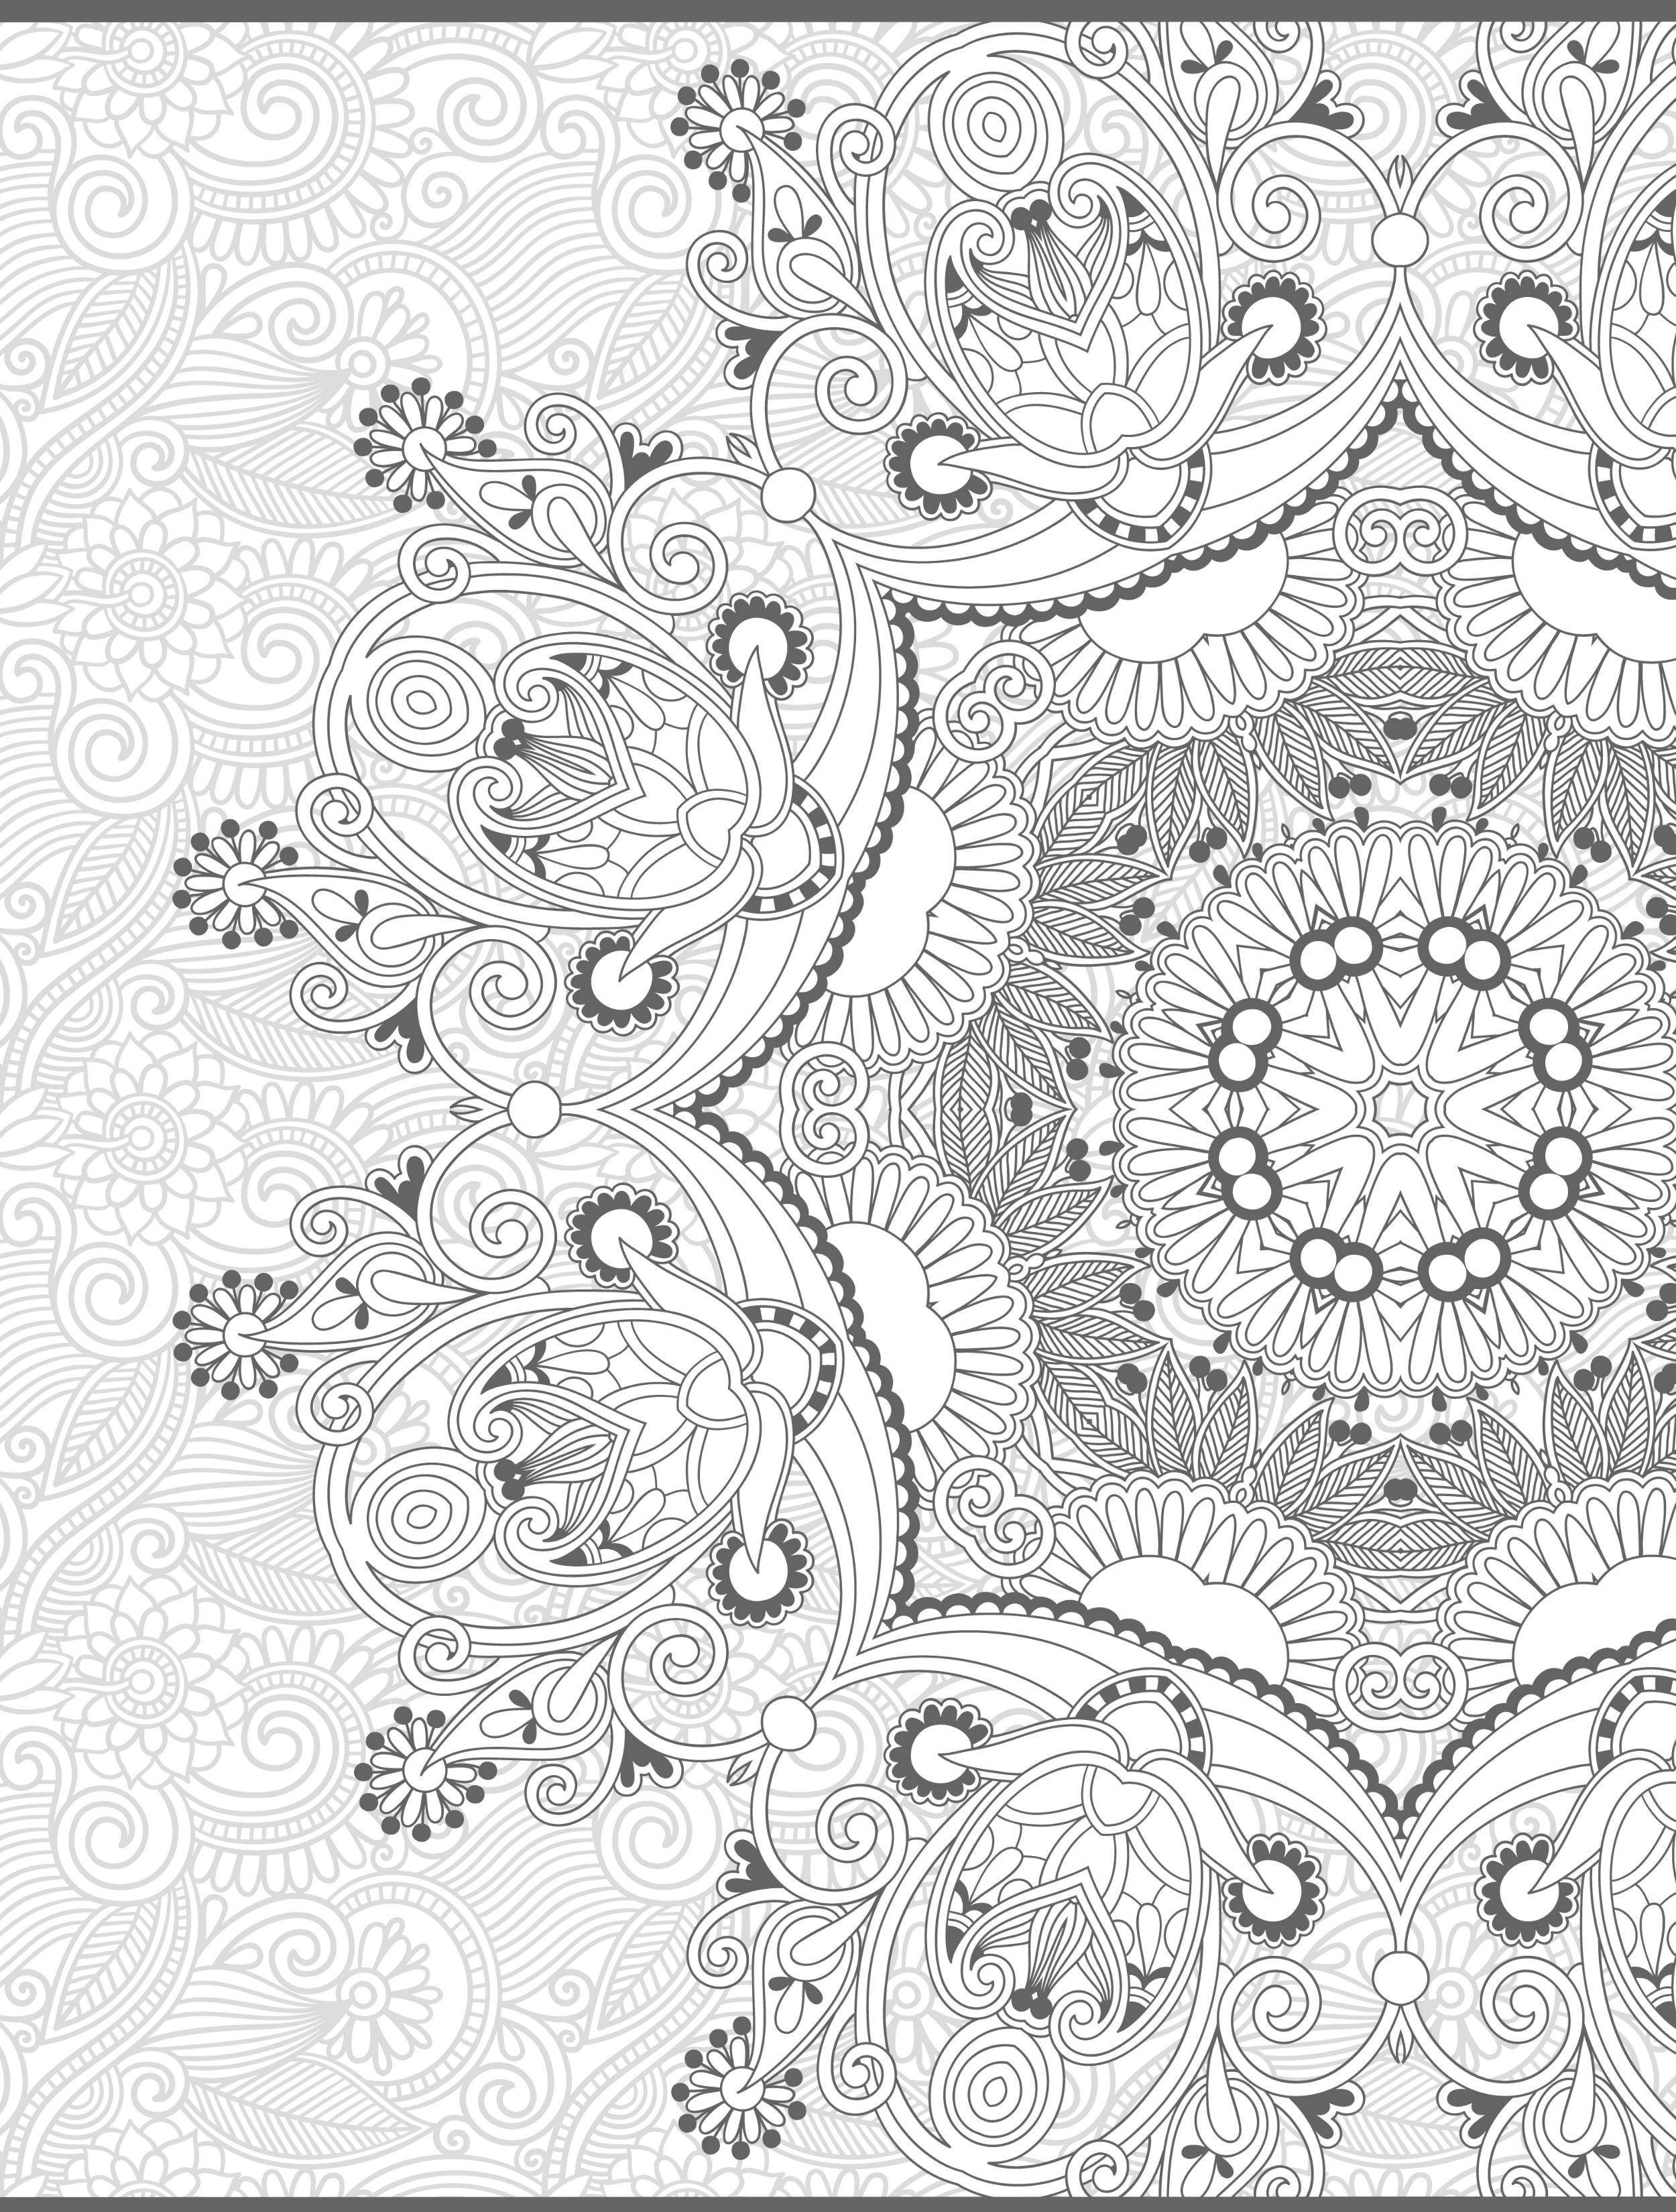 Coloring Intricate pattern with small details. Category patterns. Tags:  Patterns, flower.